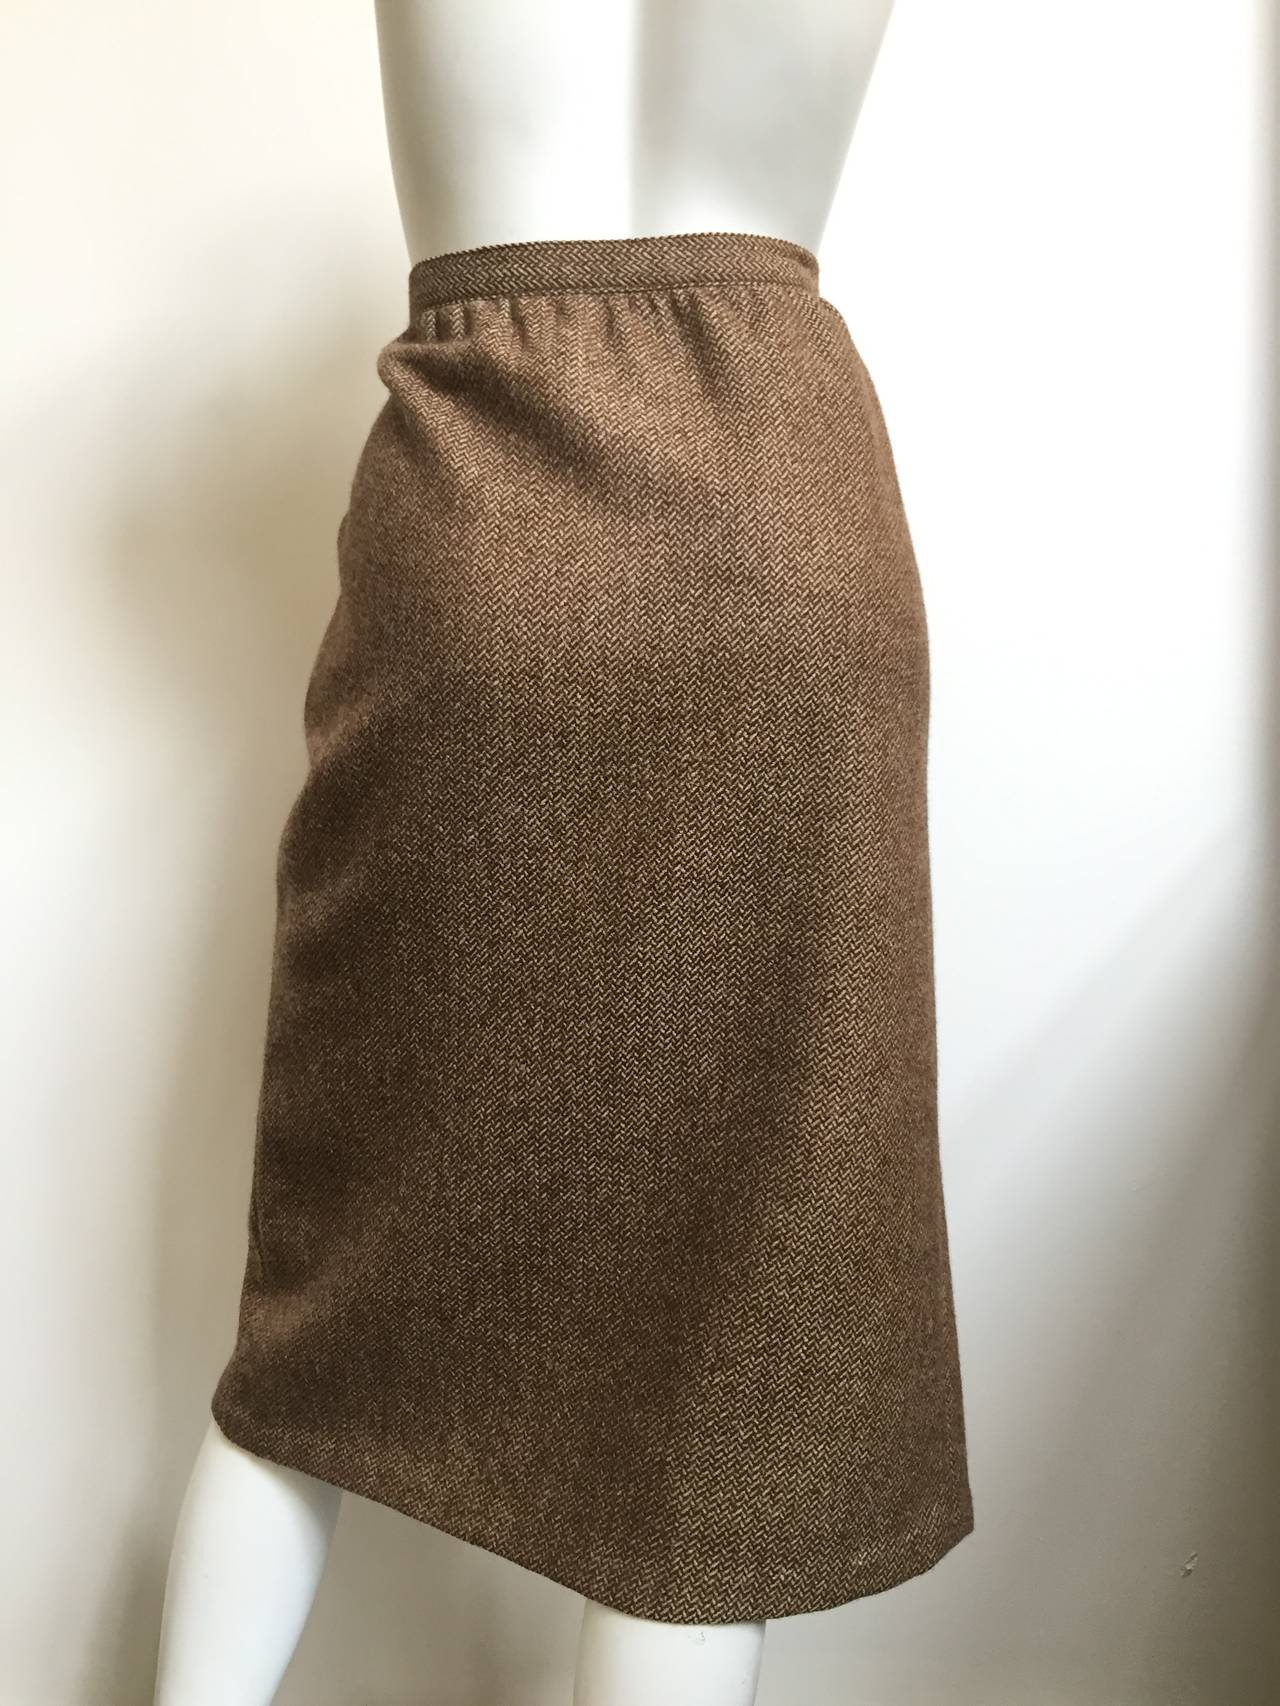 Calvin Klein Brown Wool Skirt With Pockets, 1980s  For Sale 2